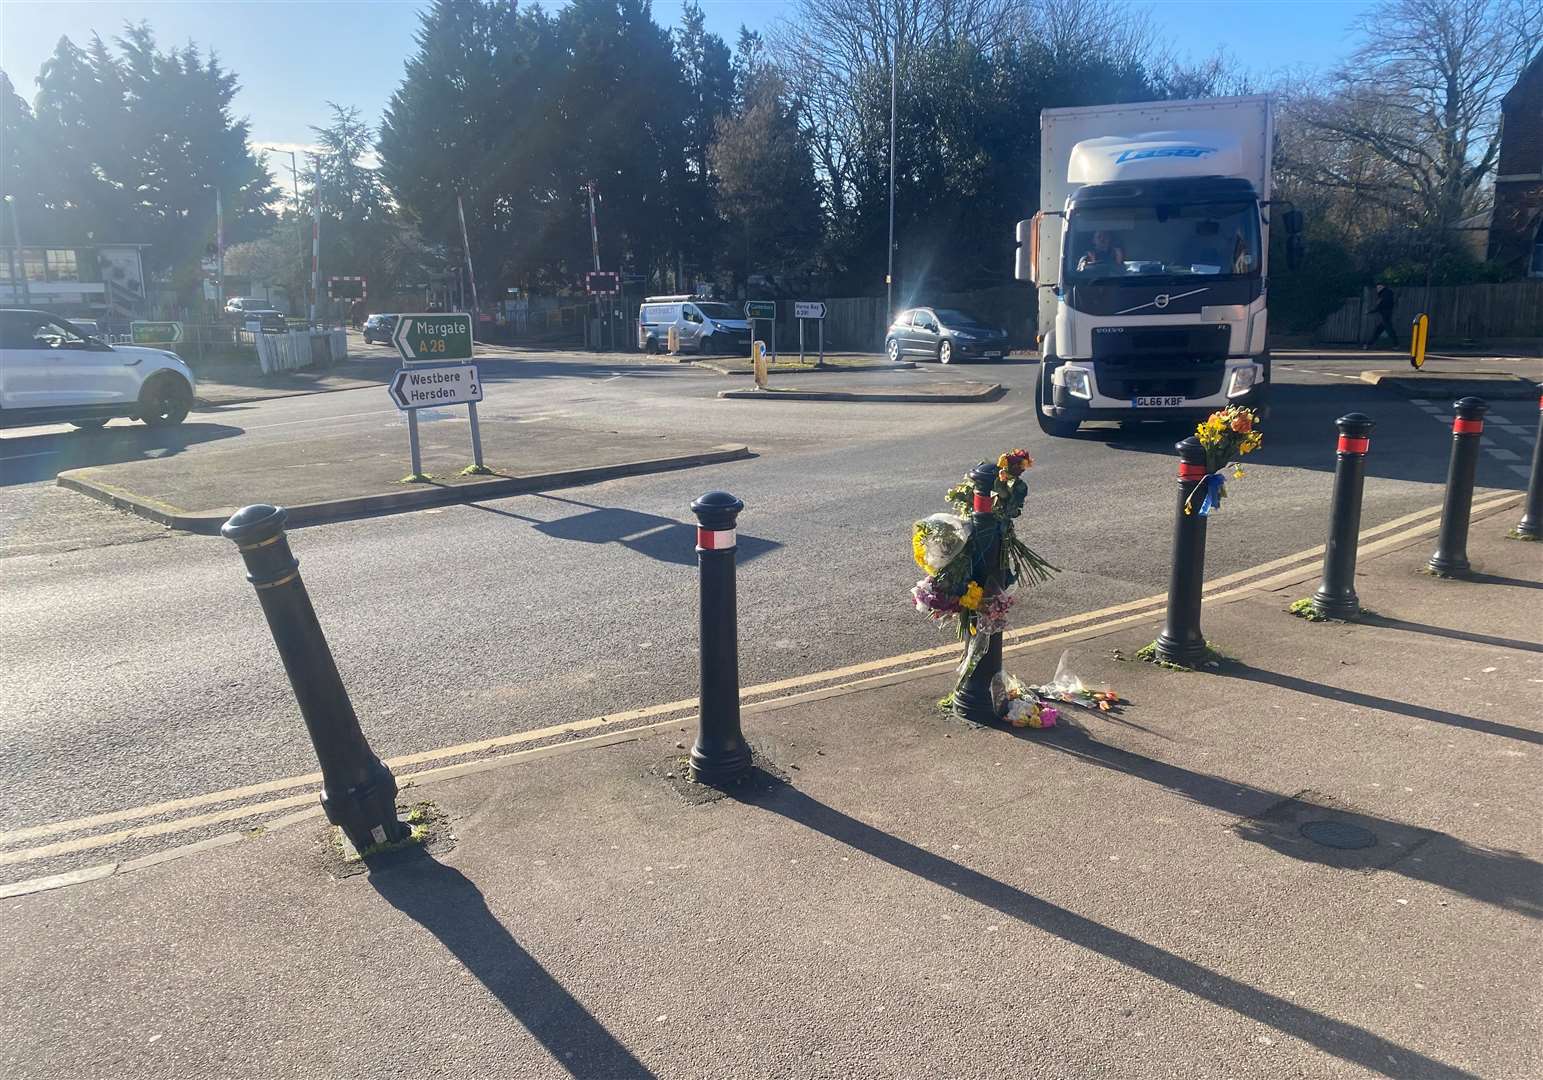 A man in his 80s was killed last week at the problematic junction in Sturry, Canterbury